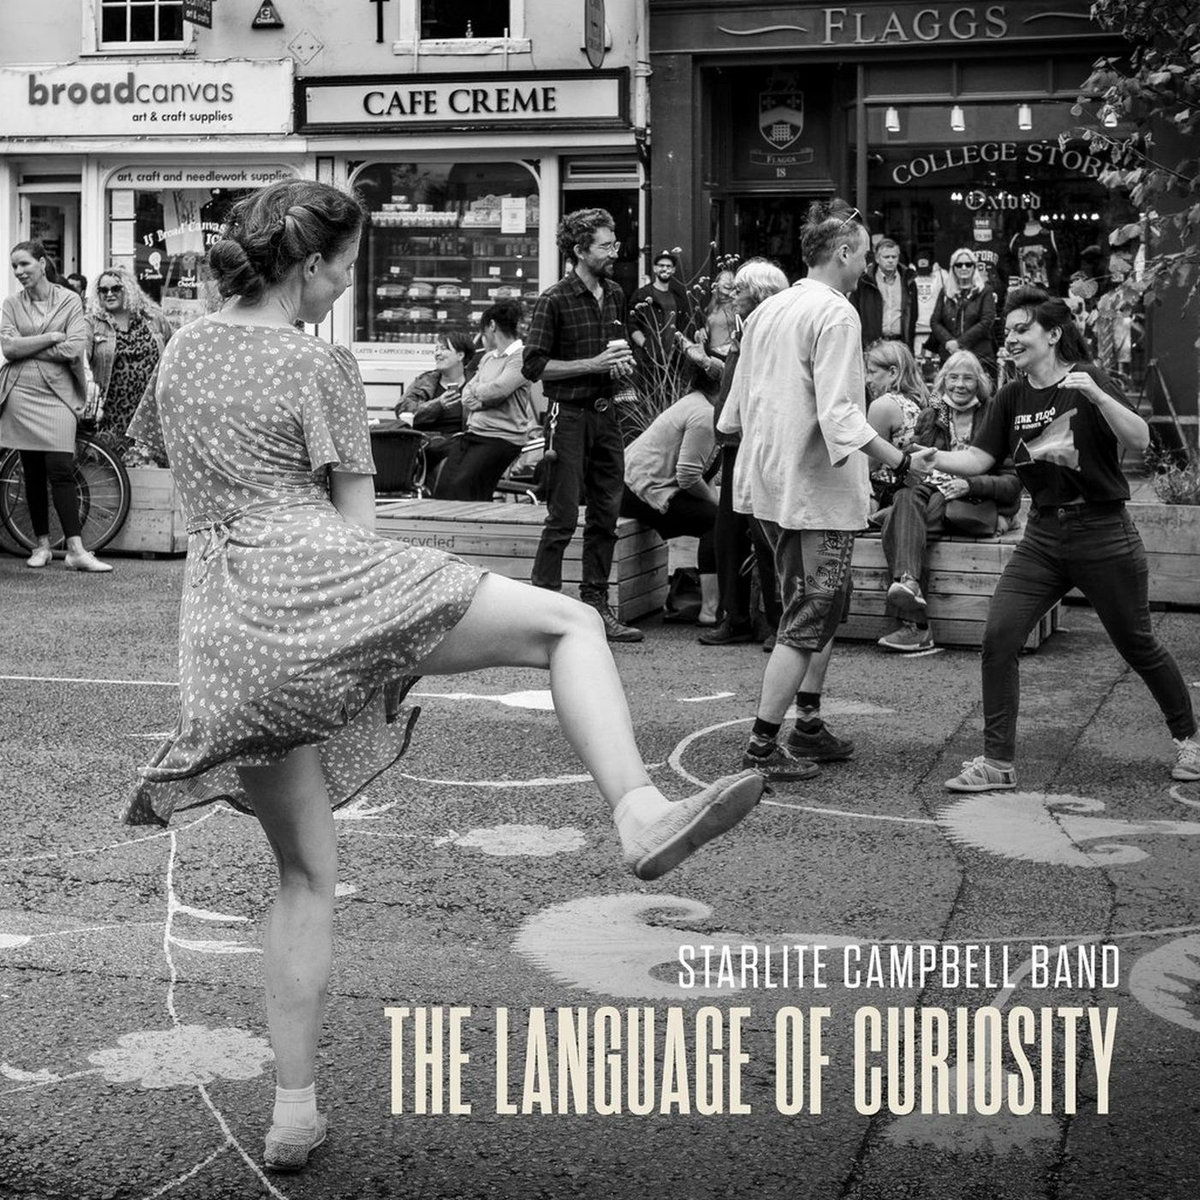 Starlite Campbell Band – The Language of Curiosity